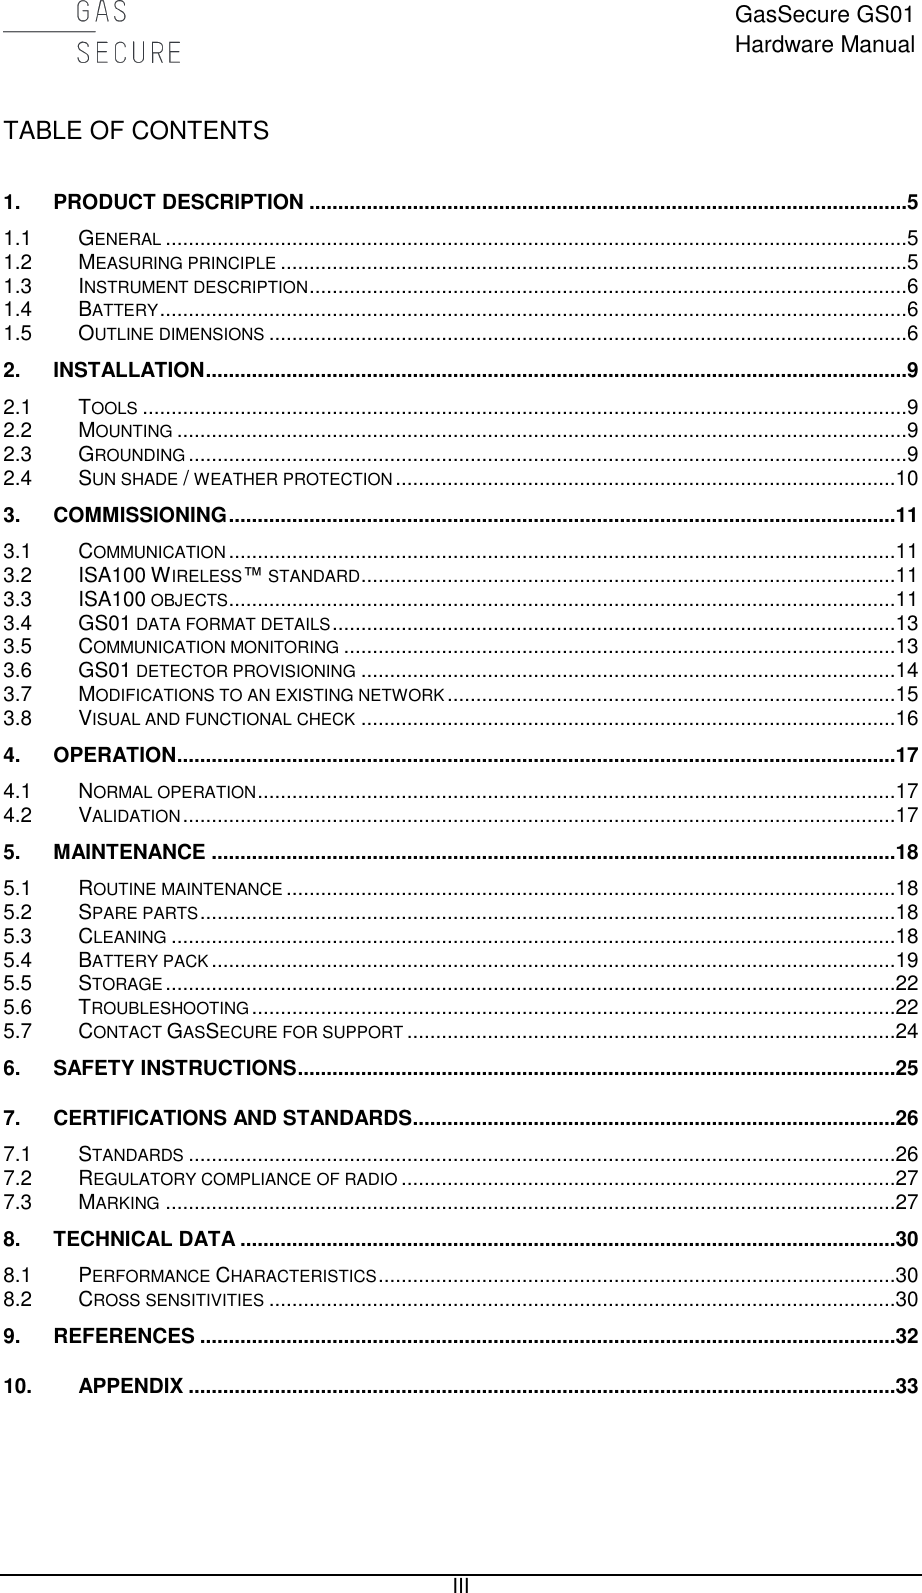  GasSecure GS01 Hardware Manual   III TABLE OF CONTENTS  1. PRODUCT DESCRIPTION ........................................................................................................5 1.1 GENERAL .................................................................................................................................5 1.2 MEASURING PRINCIPLE .............................................................................................................5 1.3 INSTRUMENT DESCRIPTION ........................................................................................................6 1.4 BATTERY ..................................................................................................................................6 1.5 OUTLINE DIMENSIONS ...............................................................................................................6 2. INSTALLATION ..........................................................................................................................9 2.1 TOOLS .....................................................................................................................................9 2.2 MOUNTING ...............................................................................................................................9 2.3 GROUNDING .............................................................................................................................9 2.4 SUN SHADE / WEATHER PROTECTION .......................................................................................10 3. COMMISSIONING ....................................................................................................................11 3.1 COMMUNICATION ....................................................................................................................11 3.2 ISA100 WIRELESS™ STANDARD .............................................................................................11 3.3 ISA100 OBJECTS ....................................................................................................................11 3.4 GS01 DATA FORMAT DETAILS ..................................................................................................13 3.5 COMMUNICATION MONITORING ................................................................................................13 3.6 GS01 DETECTOR PROVISIONING .............................................................................................14 3.7 MODIFICATIONS TO AN EXISTING NETWORK ..............................................................................15 3.8 VISUAL AND FUNCTIONAL CHECK .............................................................................................16 4. OPERATION .............................................................................................................................17 4.1 NORMAL OPERATION ...............................................................................................................17 4.2 VALIDATION ............................................................................................................................17 5. MAINTENANCE .......................................................................................................................18 5.1 ROUTINE MAINTENANCE ..........................................................................................................18 5.2 SPARE PARTS .........................................................................................................................18 5.3 CLEANING ..............................................................................................................................18 5.4 BATTERY PACK .......................................................................................................................19 5.5 STORAGE ...............................................................................................................................22 5.6 TROUBLESHOOTING ................................................................................................................22 5.7 CONTACT GASSECURE FOR SUPPORT .....................................................................................24 6. SAFETY INSTRUCTIONS ........................................................................................................25 7. CERTIFICATIONS AND STANDARDS ....................................................................................26 7.1 STANDARDS ...........................................................................................................................26 7.2 REGULATORY COMPLIANCE OF RADIO ......................................................................................27 7.3 MARKING ...............................................................................................................................27 8. TECHNICAL DATA ..................................................................................................................30 8.1 PERFORMANCE CHARACTERISTICS ..........................................................................................30 8.2 CROSS SENSITIVITIES .............................................................................................................30 9. REFERENCES .........................................................................................................................32 10. APPENDIX ...........................................................................................................................33    